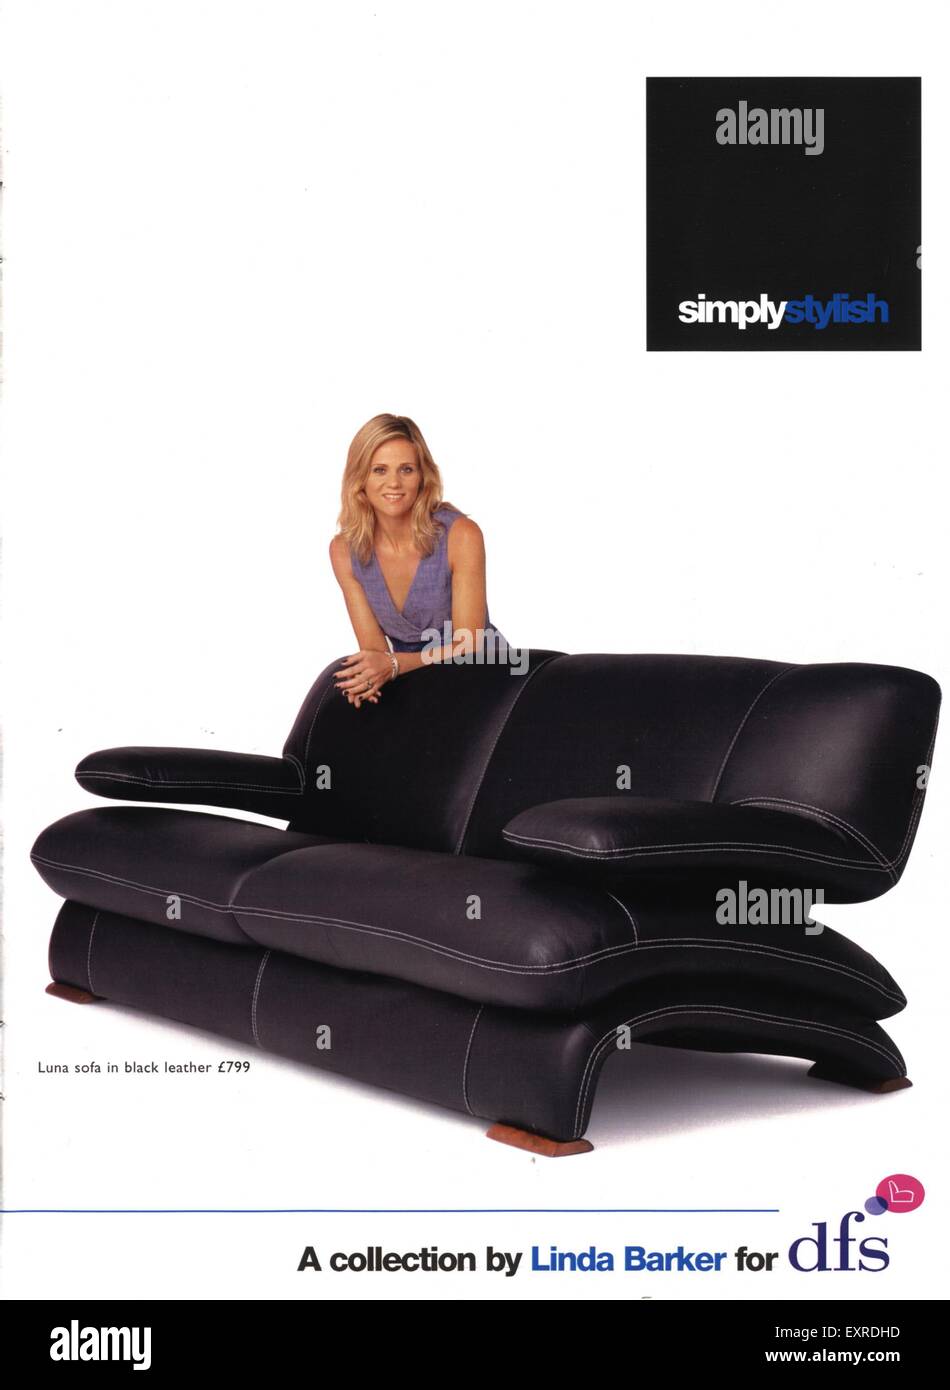 Dfs furniture Cut Out Stock Images & Pictures - Alamy